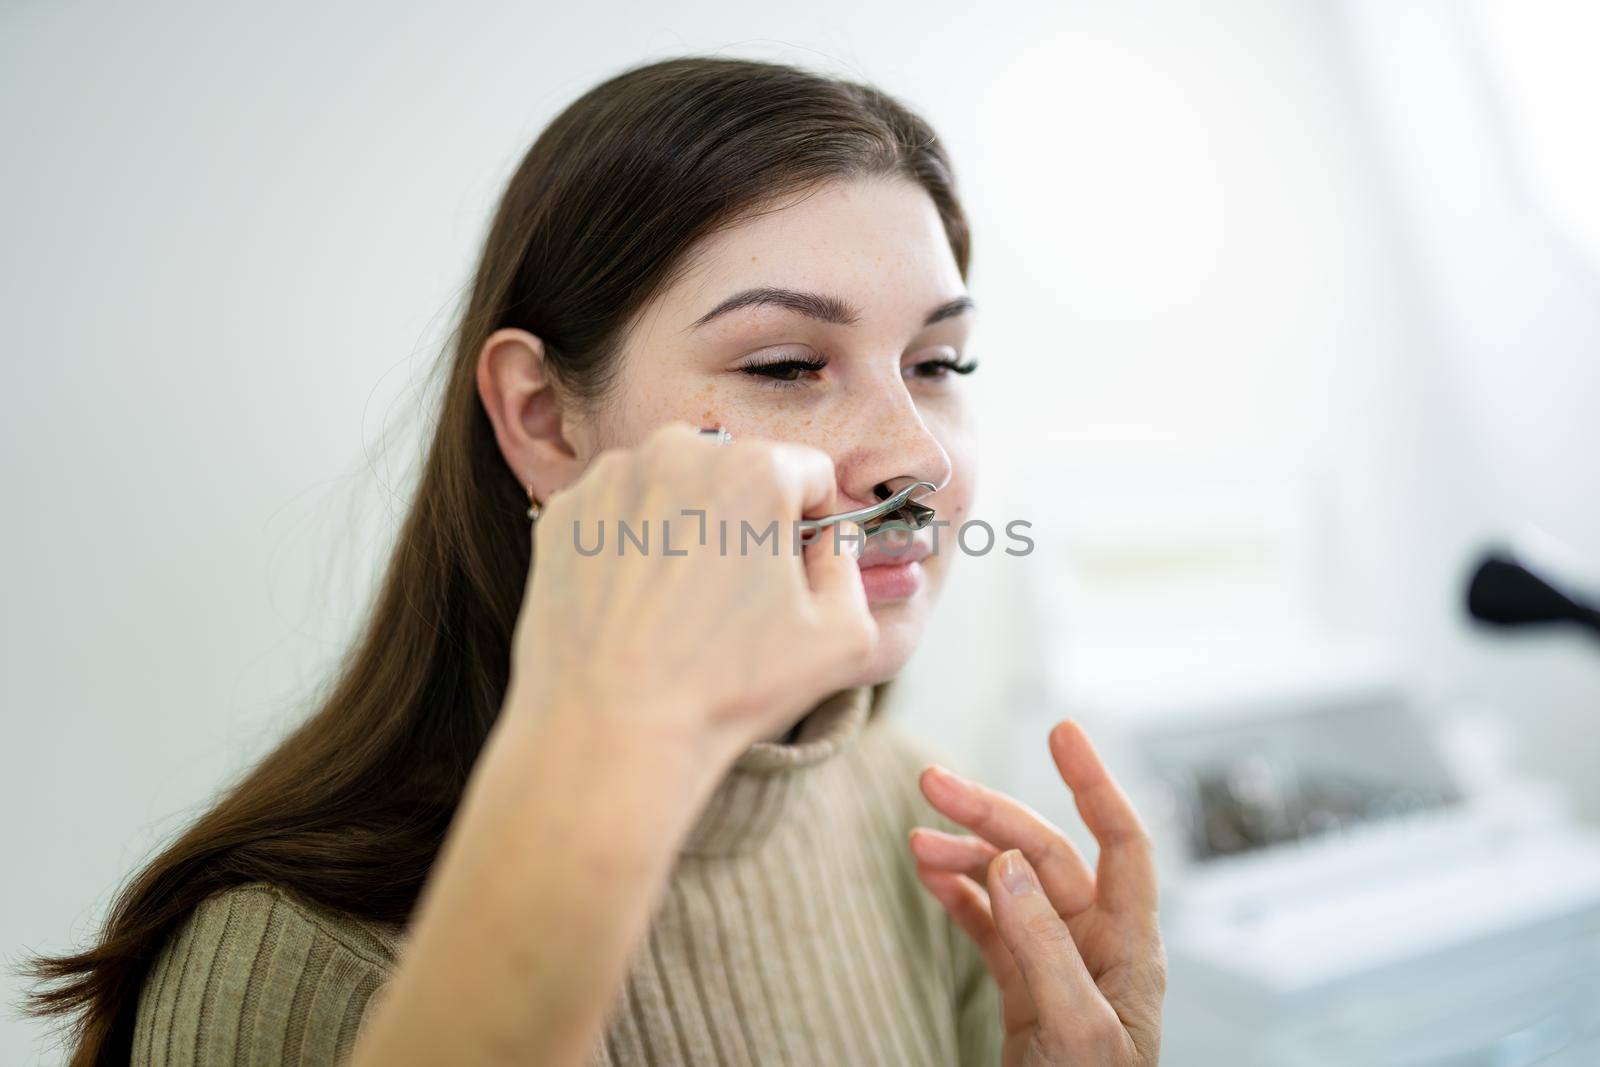 Female ENT doctor examines patient's sinuses with medical instrument in modern clinic. Otorhinolaryngologist checks the patient's girl's nose for diseases, allergies and curvature of the nasal septum.